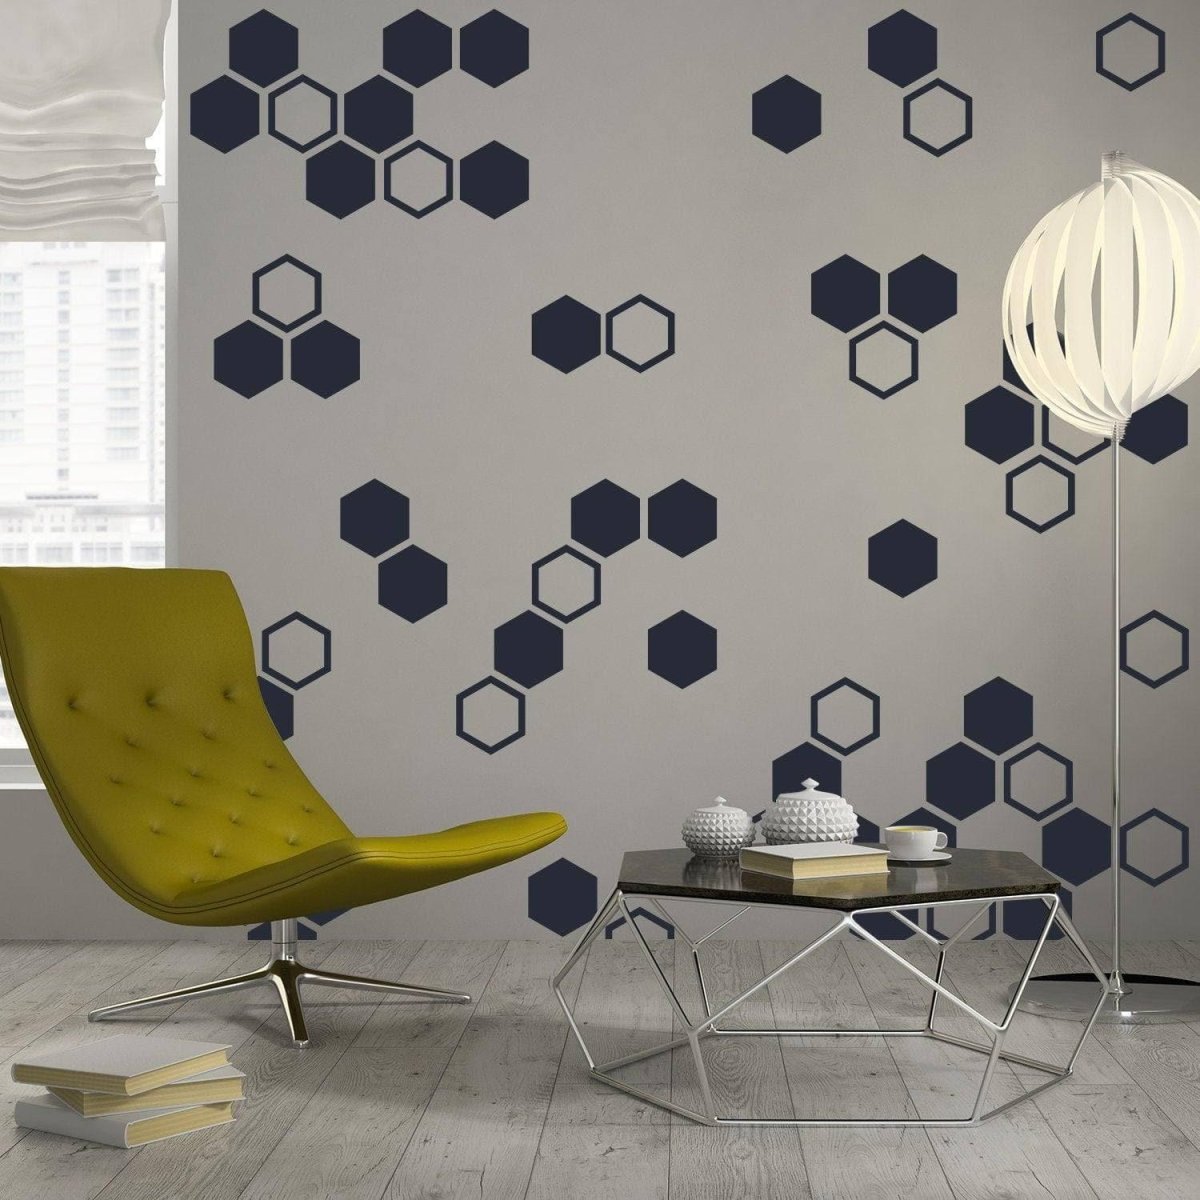 Golden Hive Wall Decals: Elegant Geometric Hexagon Stickers for Stunning Room Decor - Decords